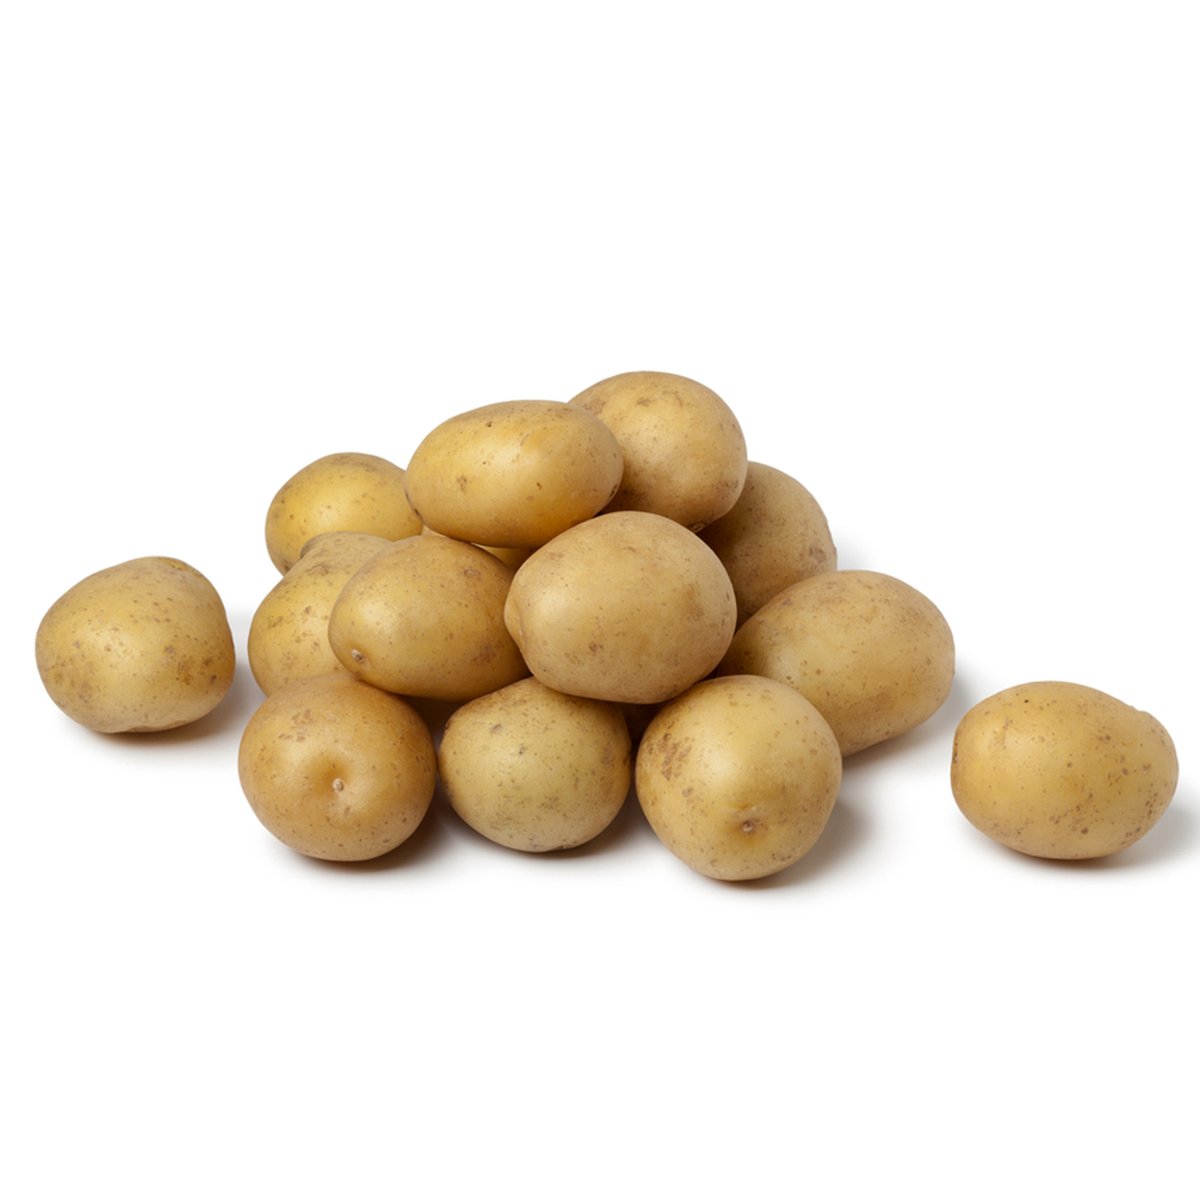 Baby Potato 500g Approx Weight